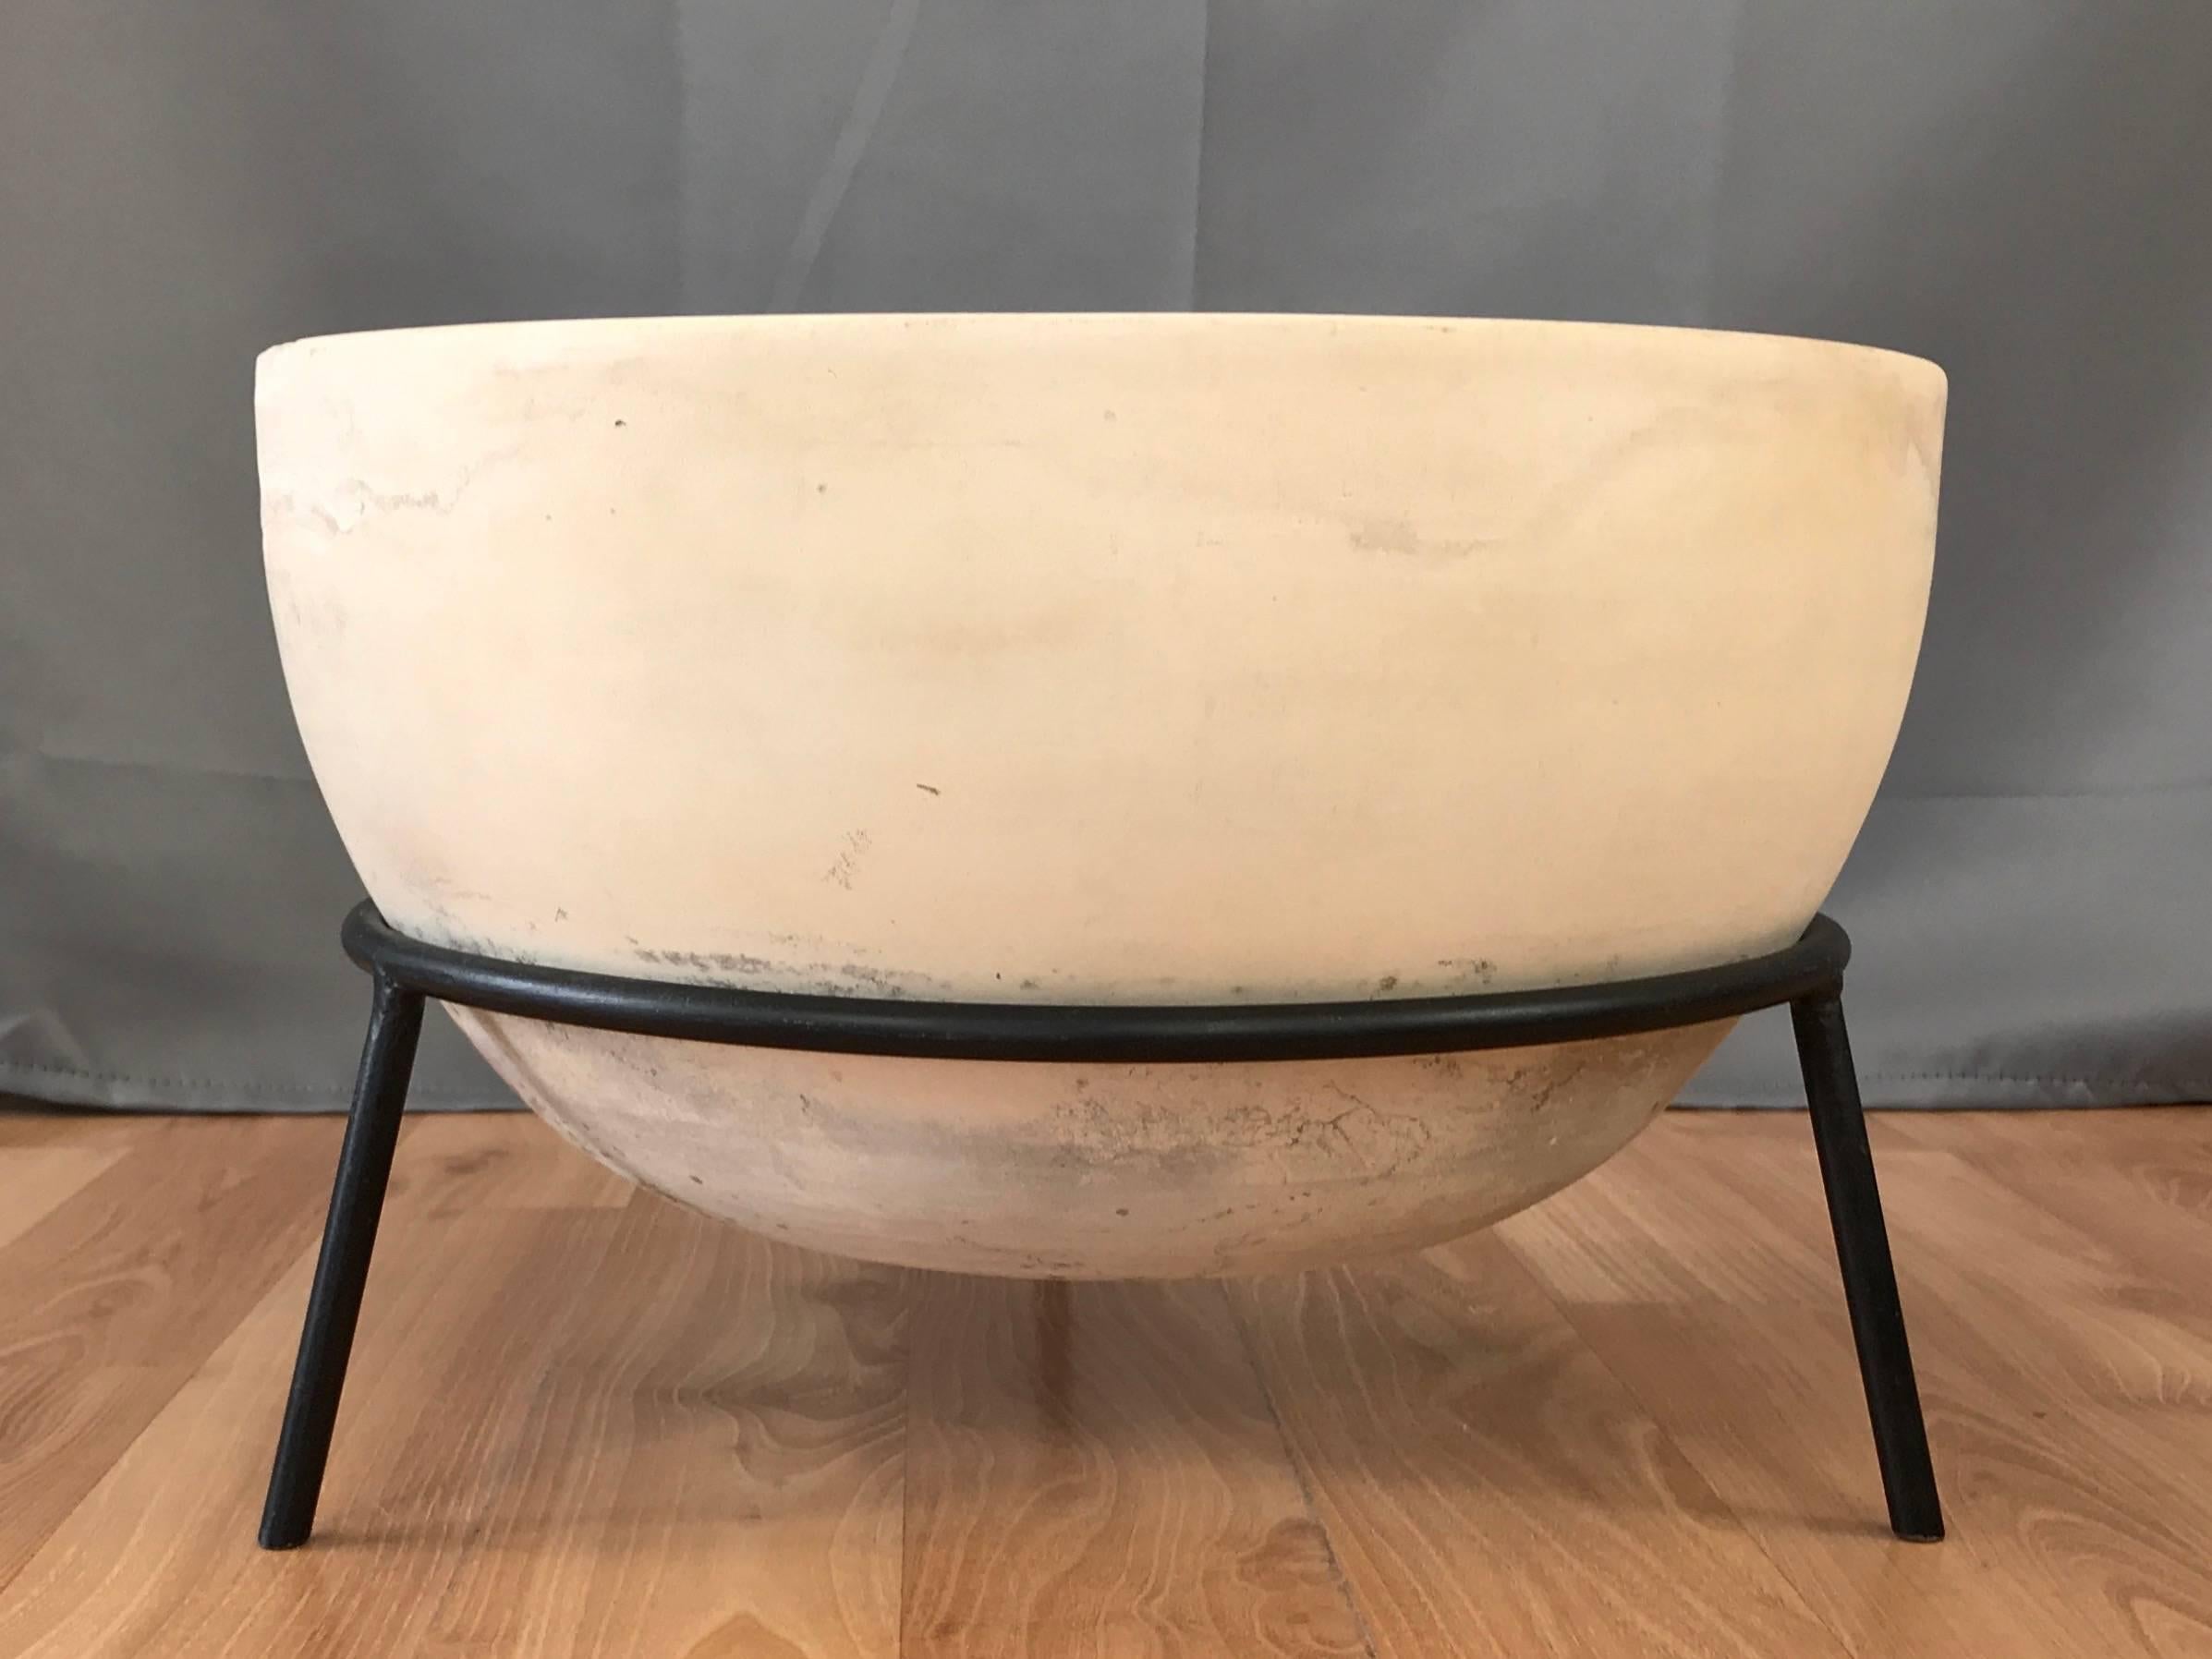 A rare 1950s FX planter with original MS-FX stand by John Follis for Architectural Pottery.

Large, slightly ovoid bowl-shaped ceramic vessel in cream with bisque finish. An assortment of naturally acquired spots and colorations on its lower portion